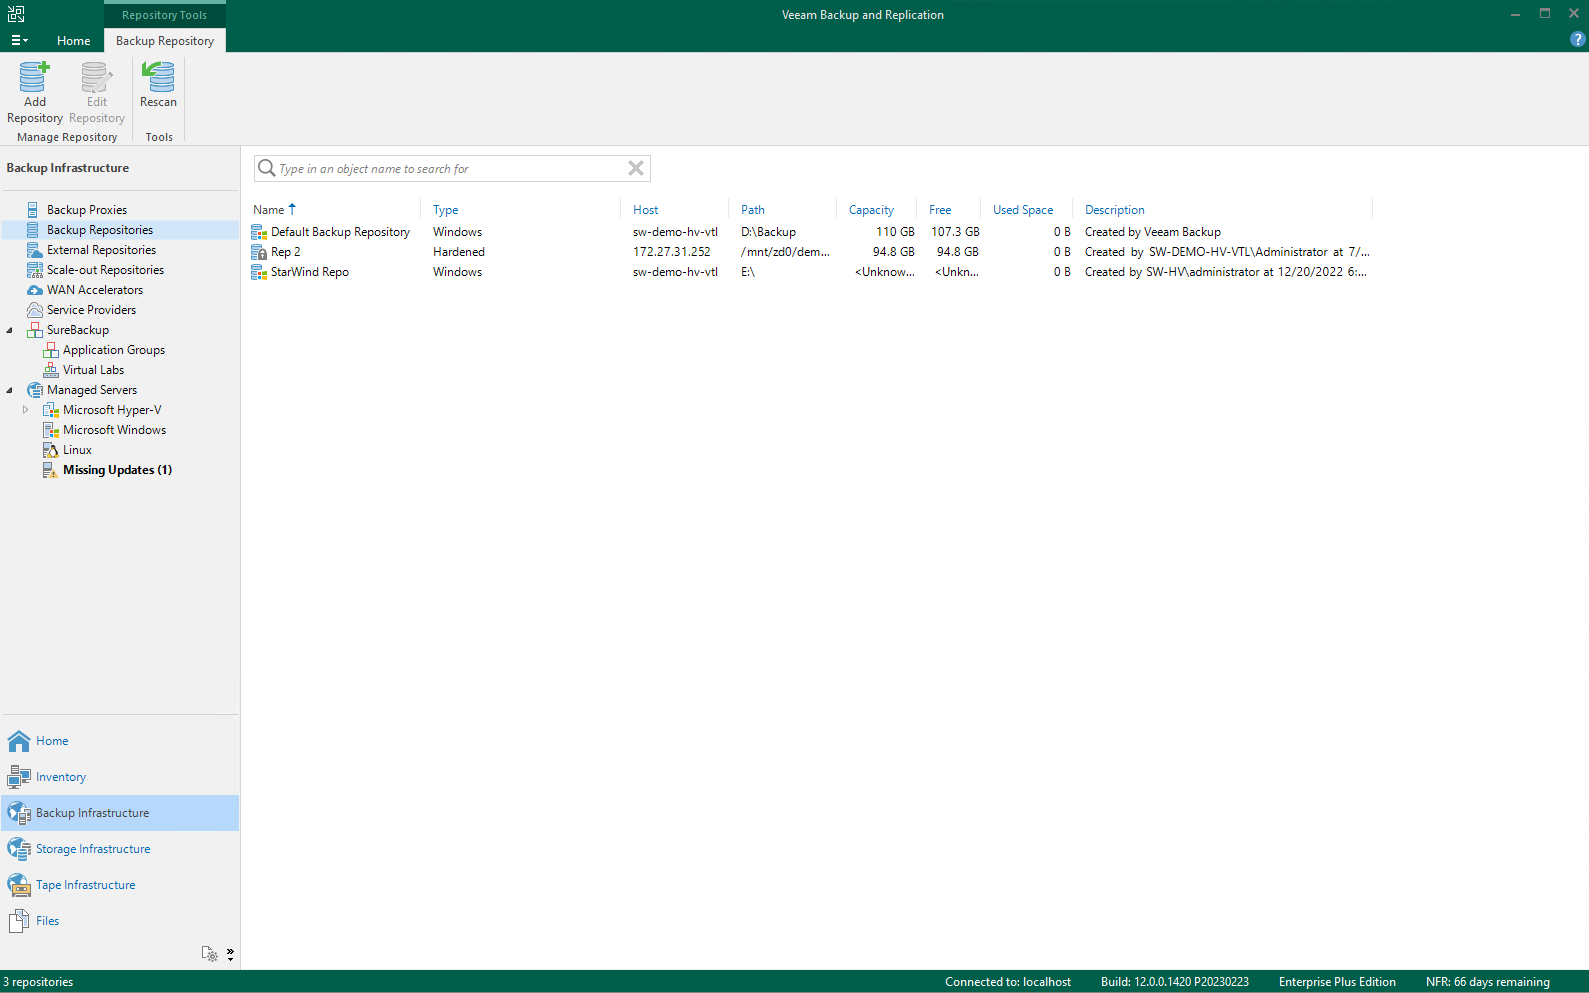 Veeam Backup and Replication console | Navigate to “Backup Infrastructure”, and select “Backup Repositories”